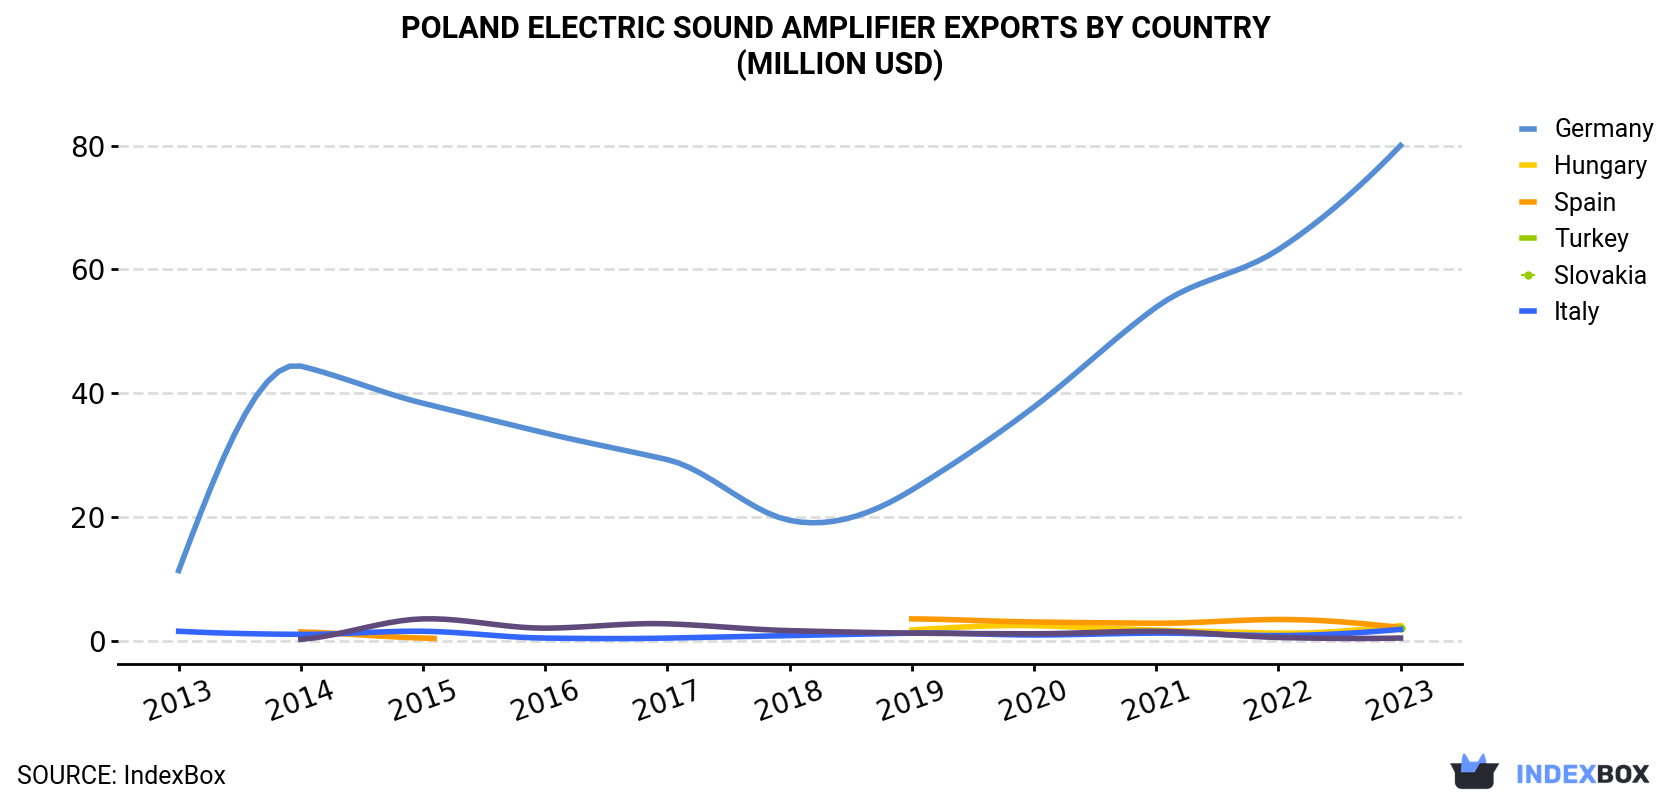 Poland Electric Sound Amplifier Exports By Country (Million USD)